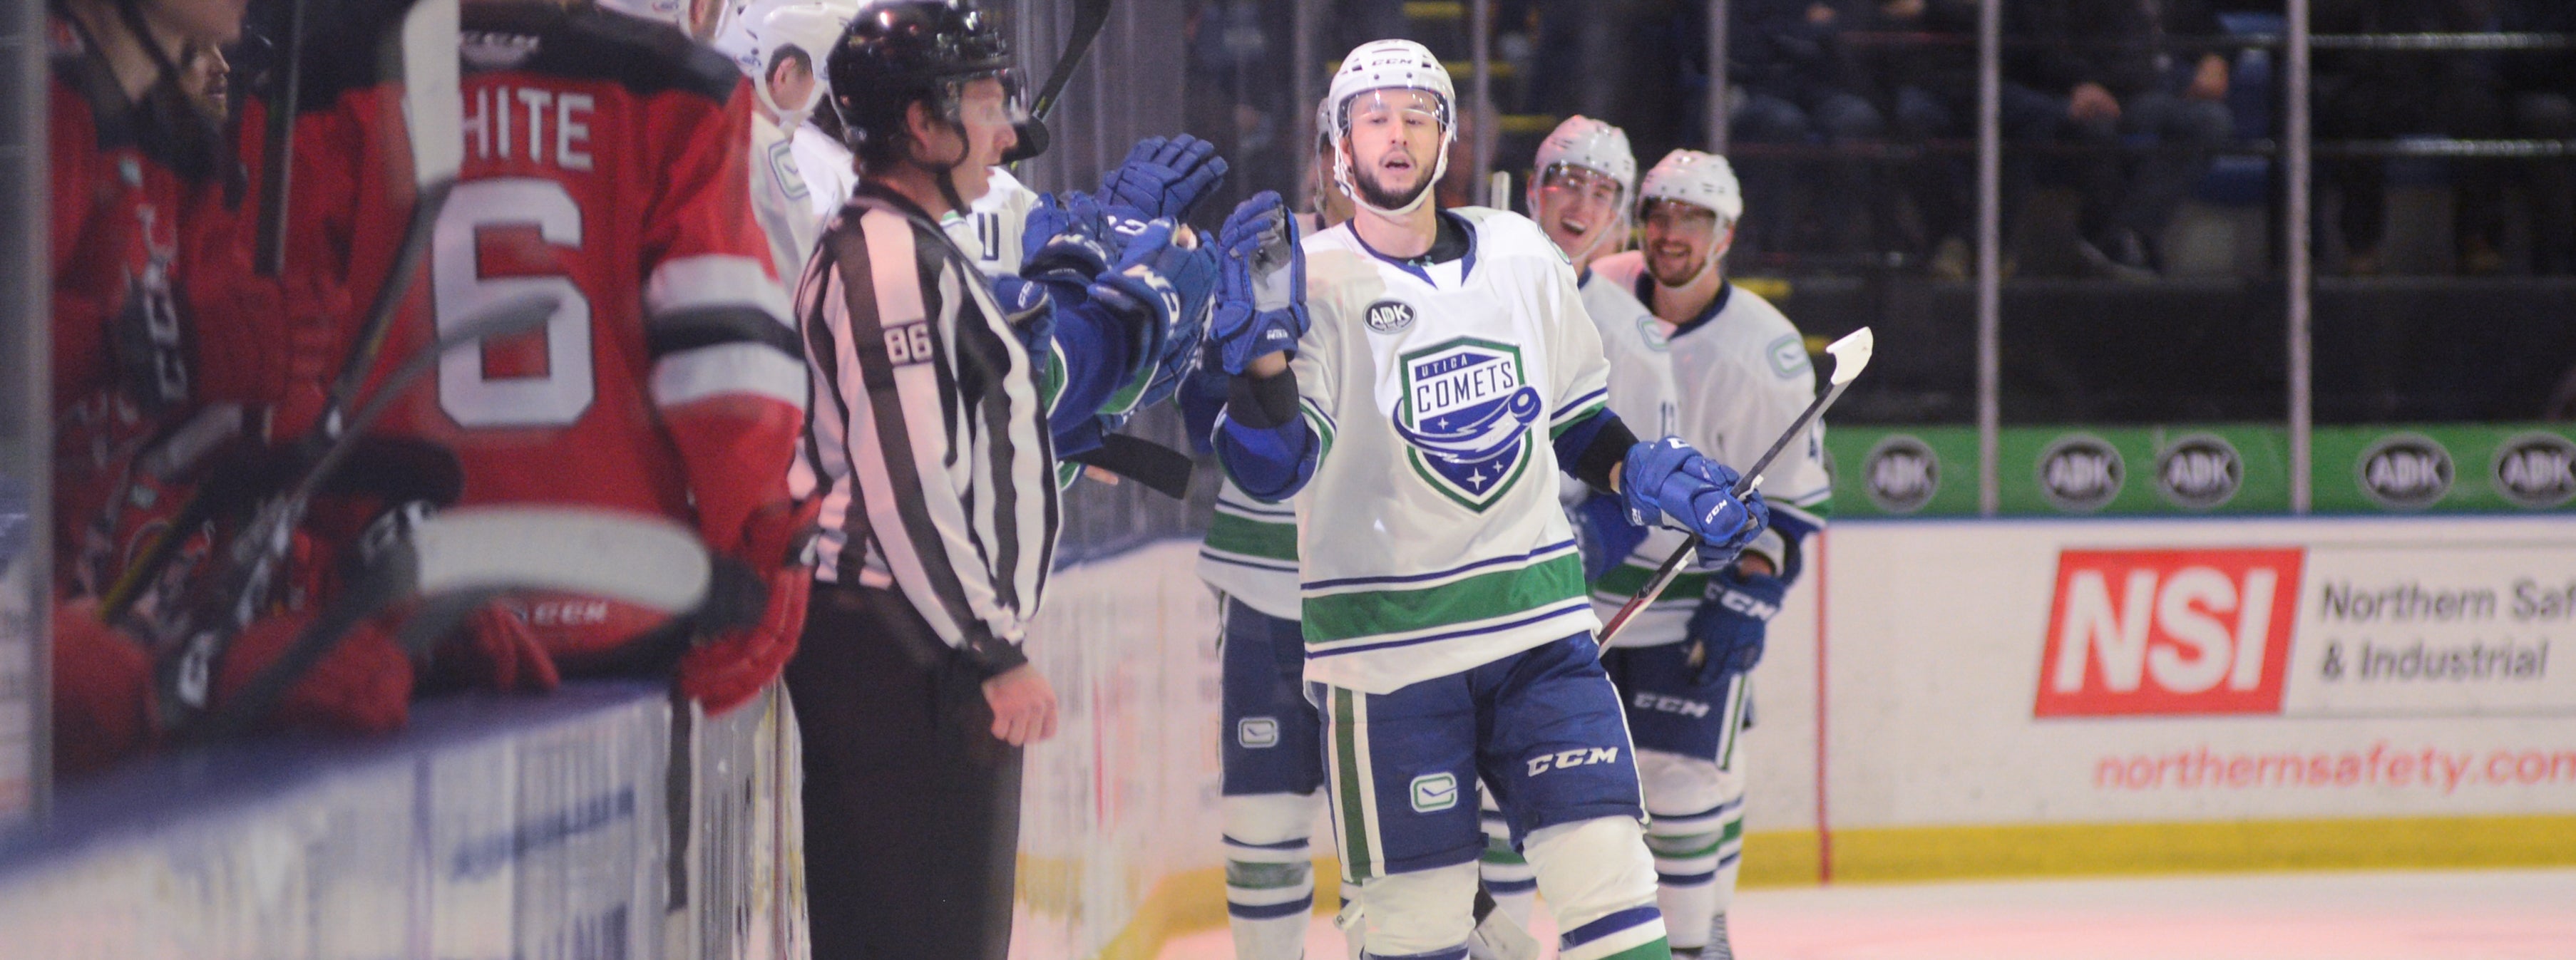 COMETS GRIND OUT WIN OVER BINGHAMTON TO STAY UNDEFEATED